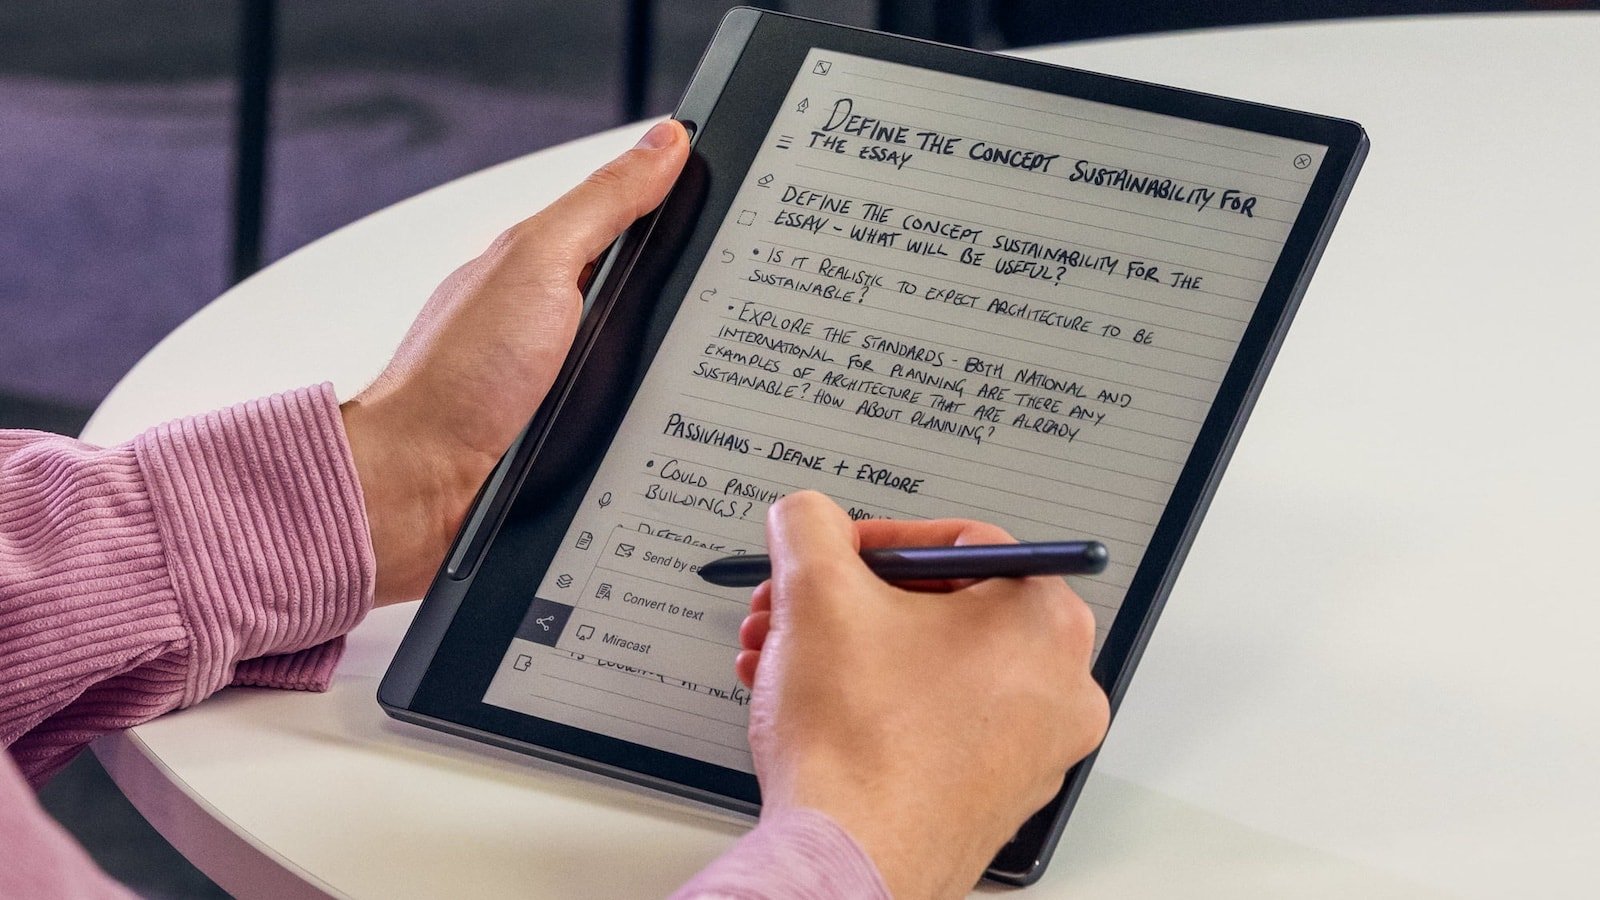 Lenovo Smart Paper 10.3″ E-Ink tablet lets you write with the stylus or annotate documents